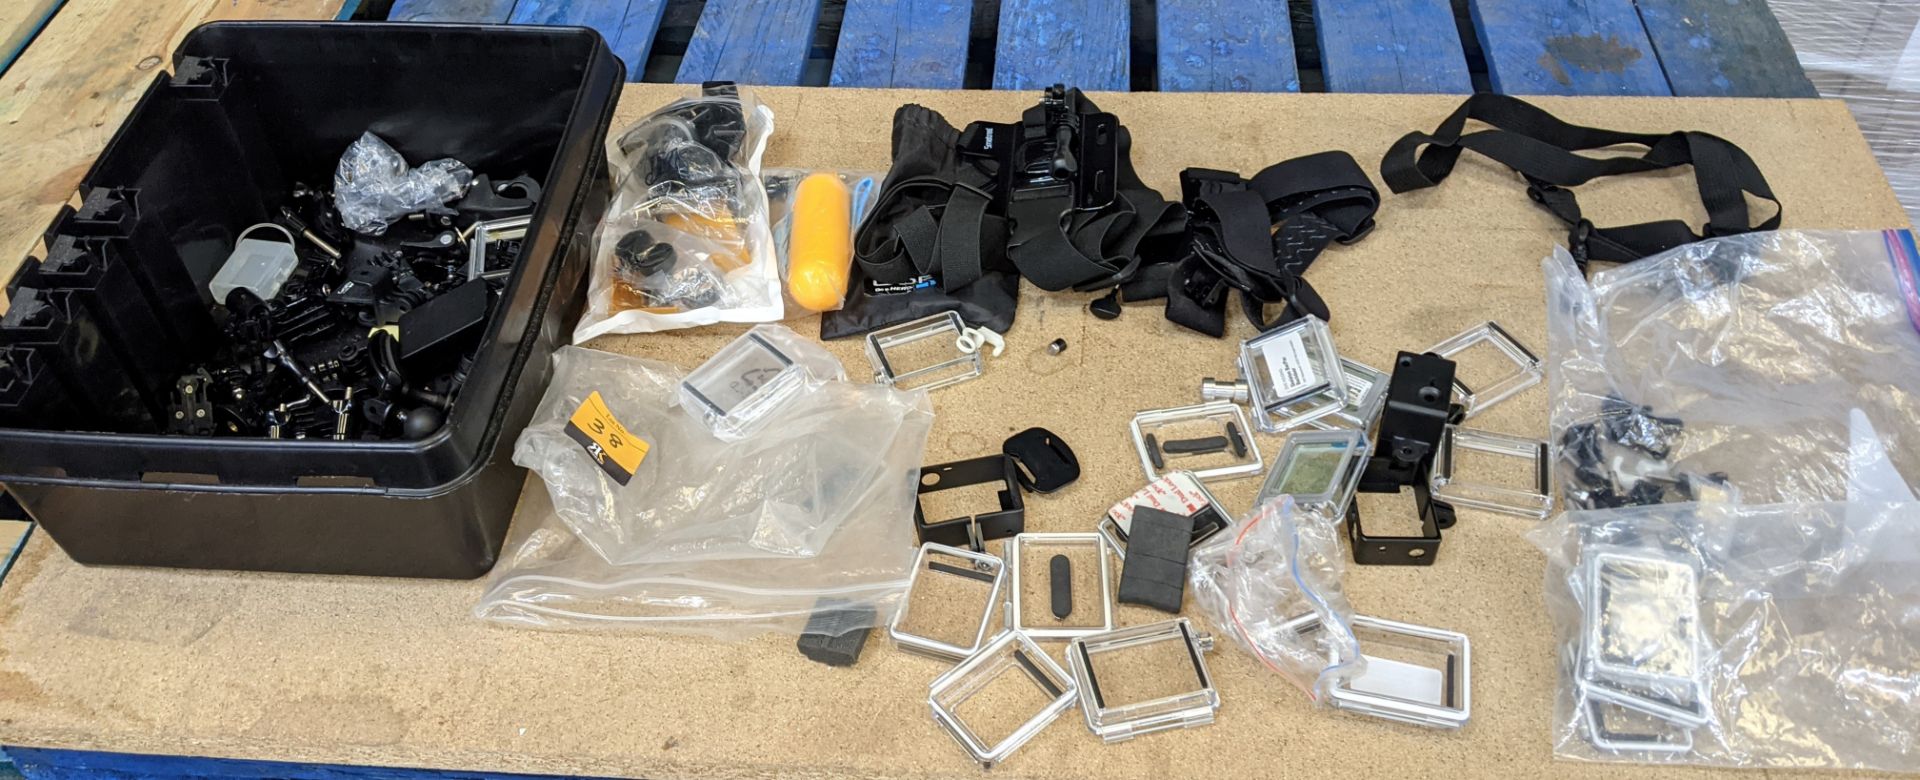 Large quantity of assorted GoPro accessories comprising large black tray & contents plus bag in fron